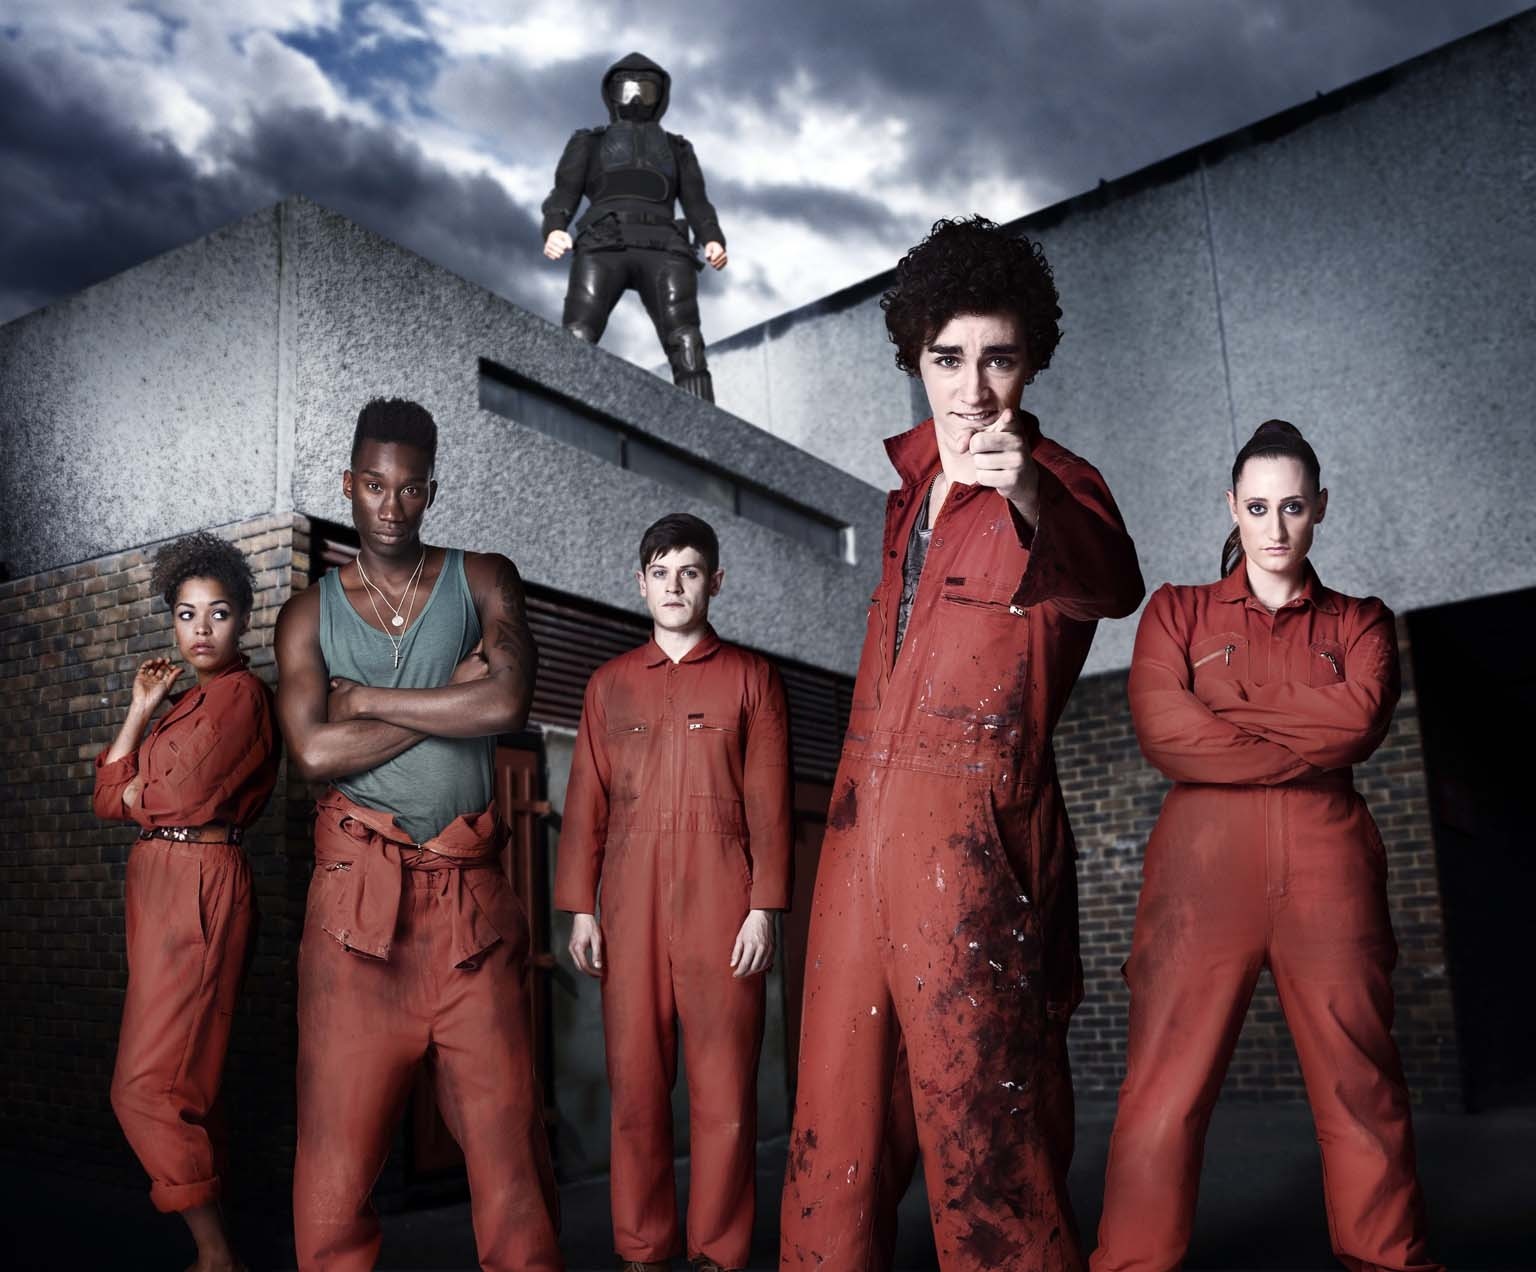 These 5 shows like Misfits prove that outcasts absolutely rock! Check them out and add them to your binge-watch list!